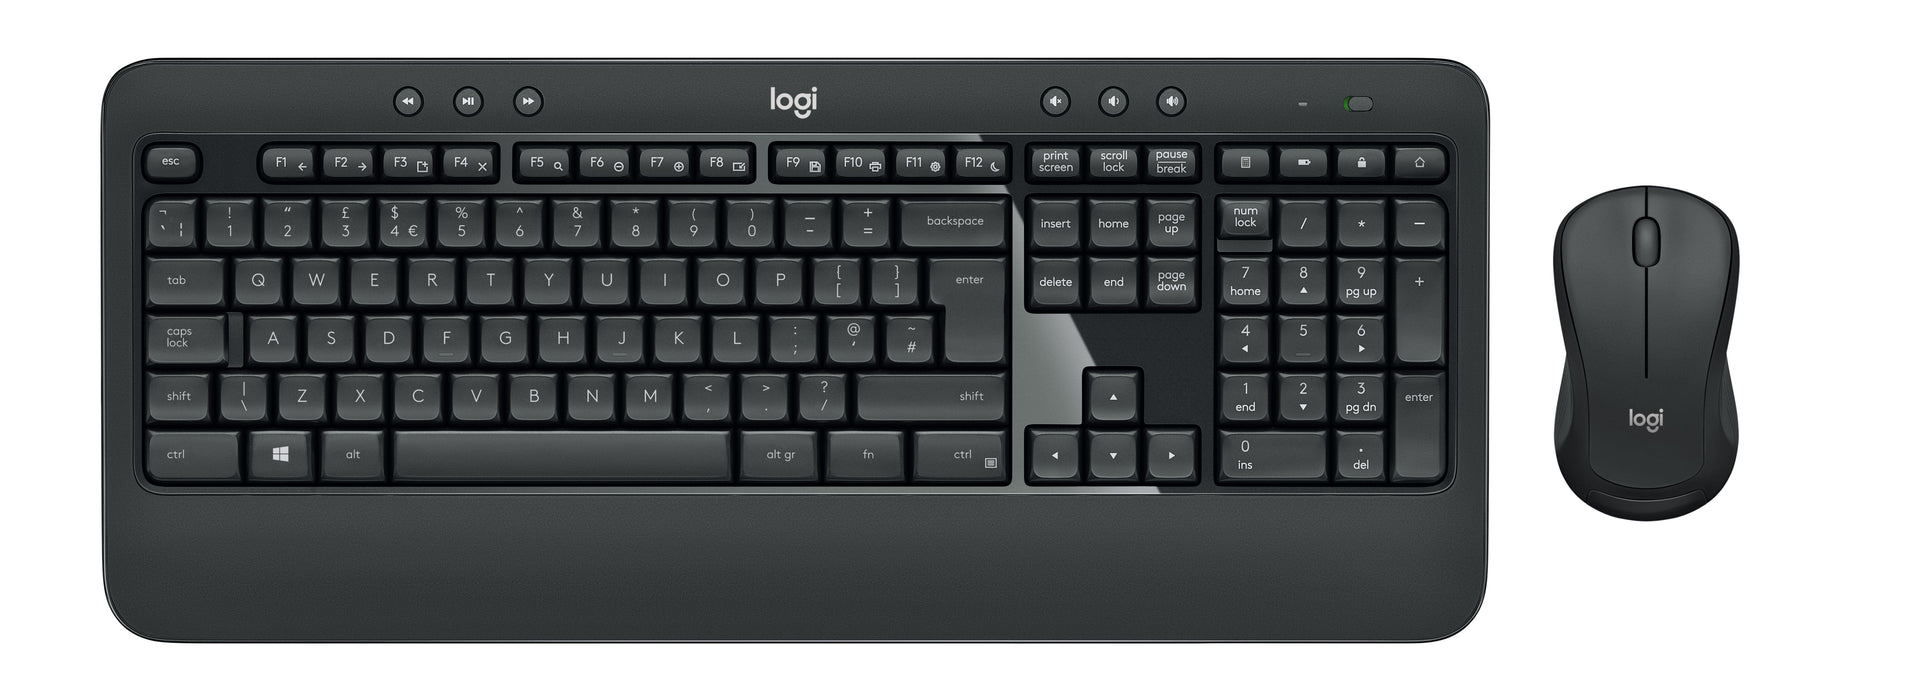 Logitech MK540 ADVANCED Wireless Keyboard and Mouse Combo, Wireless, USB, Membrane, QWERTZ, Black, White, Mouse included